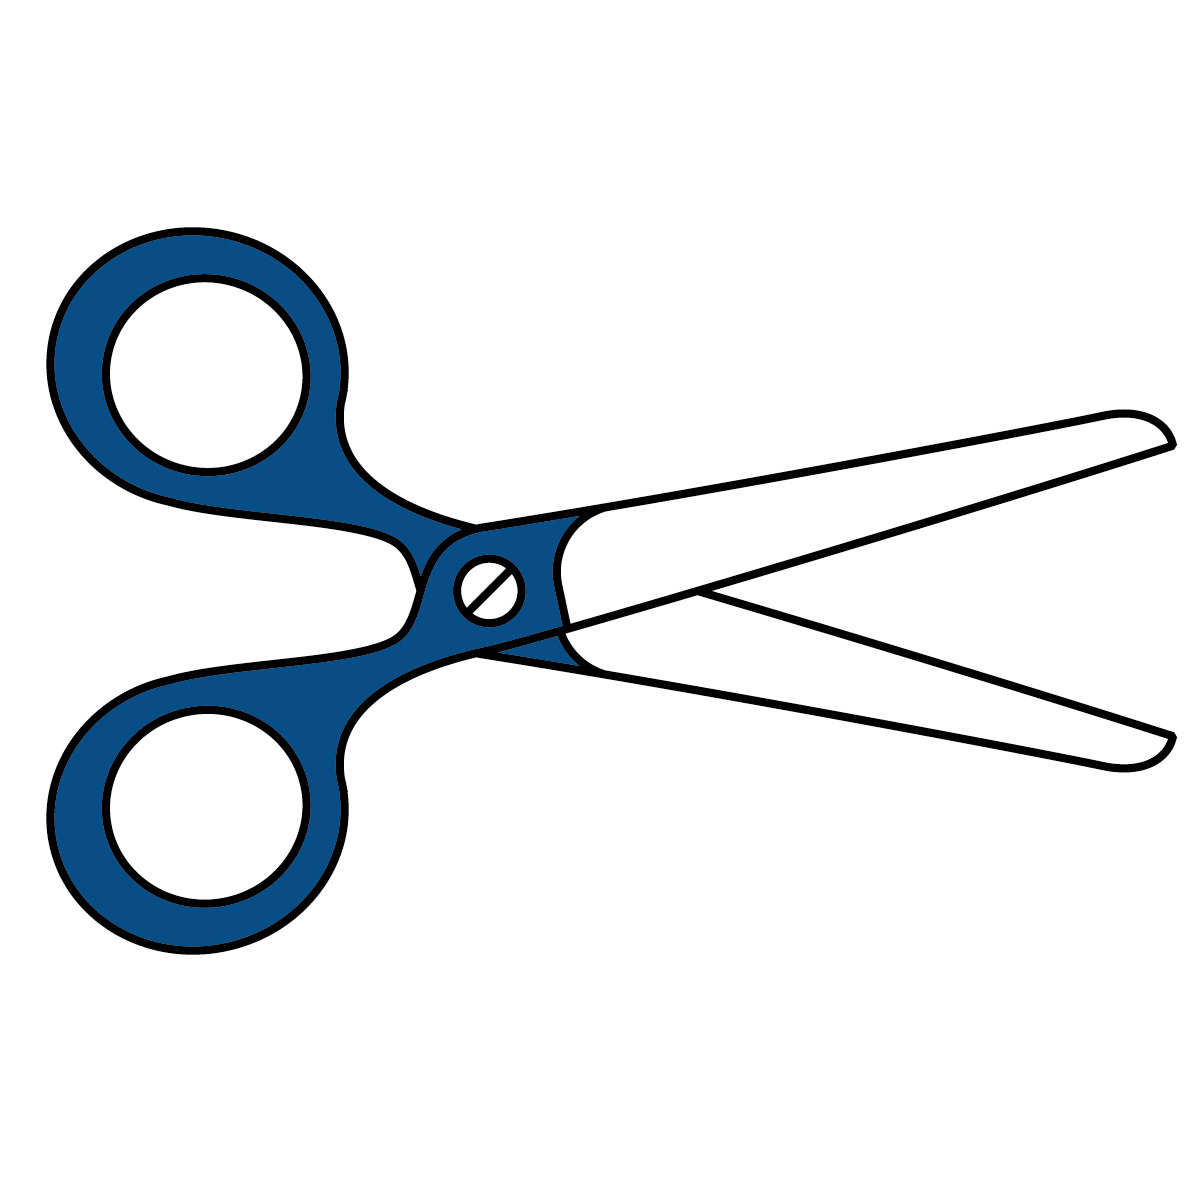 Scissors Black And White Images Hd Image Clipart